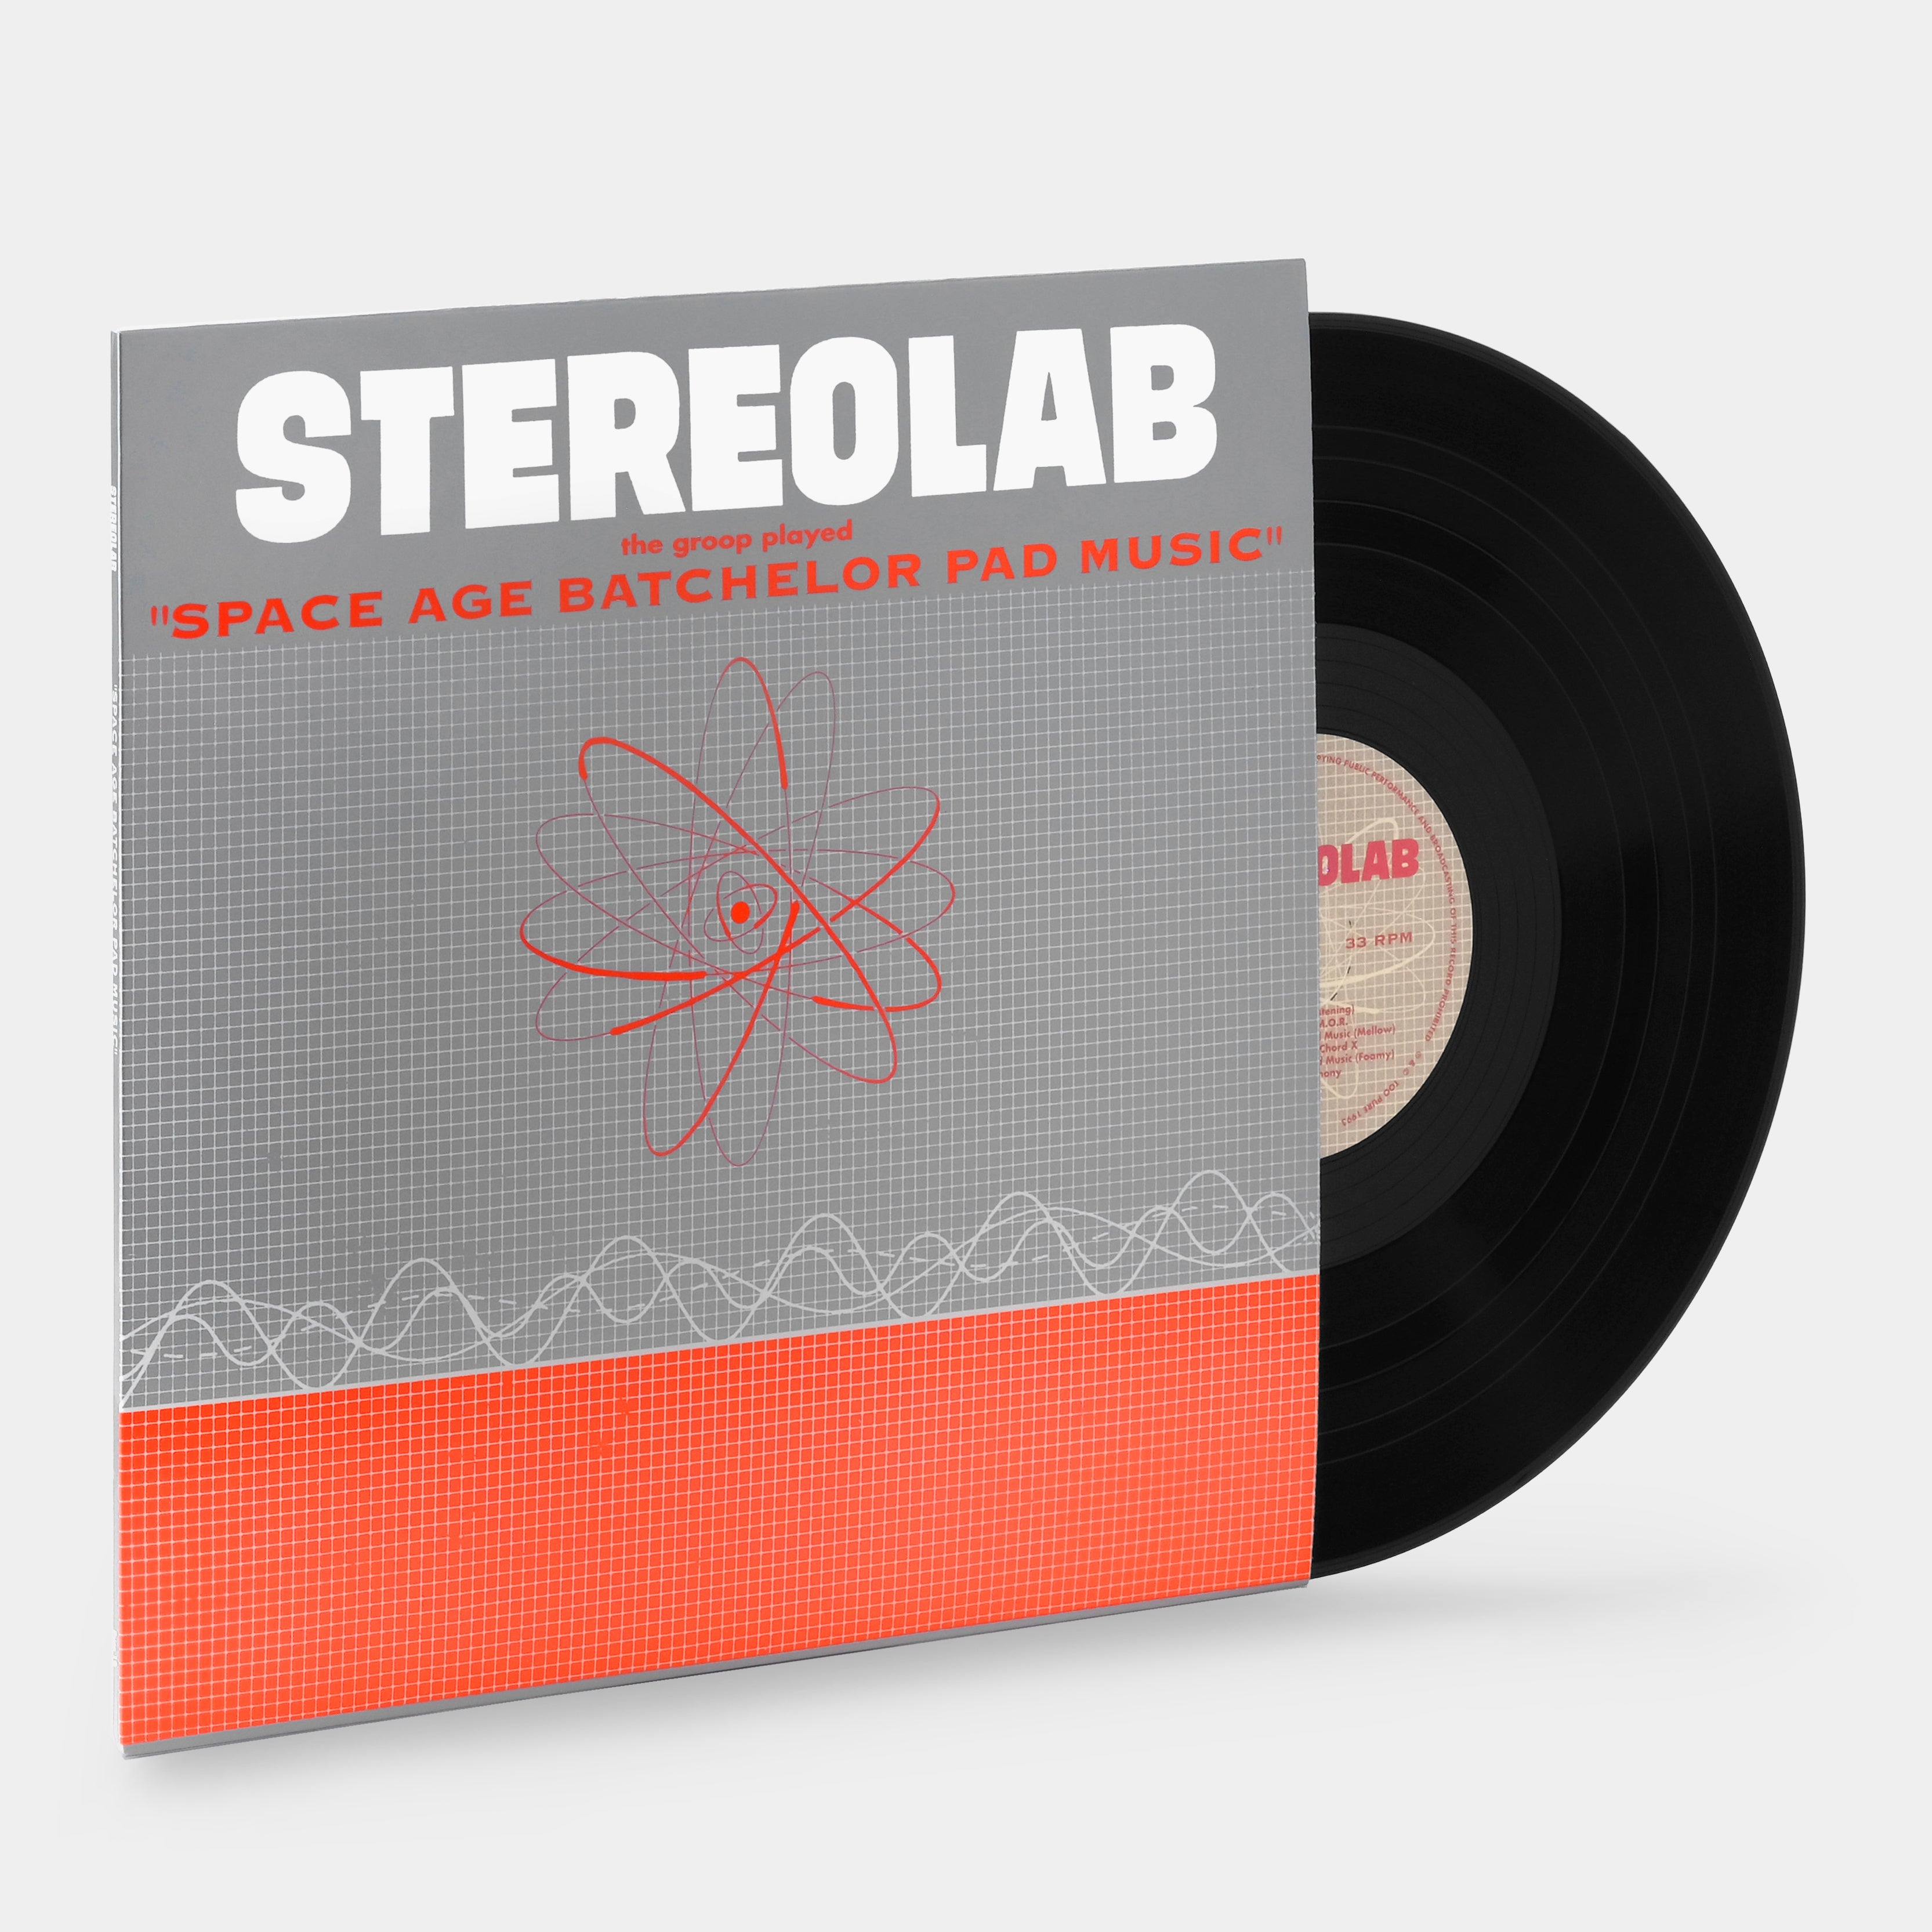 Stereolab - The Groop Played 